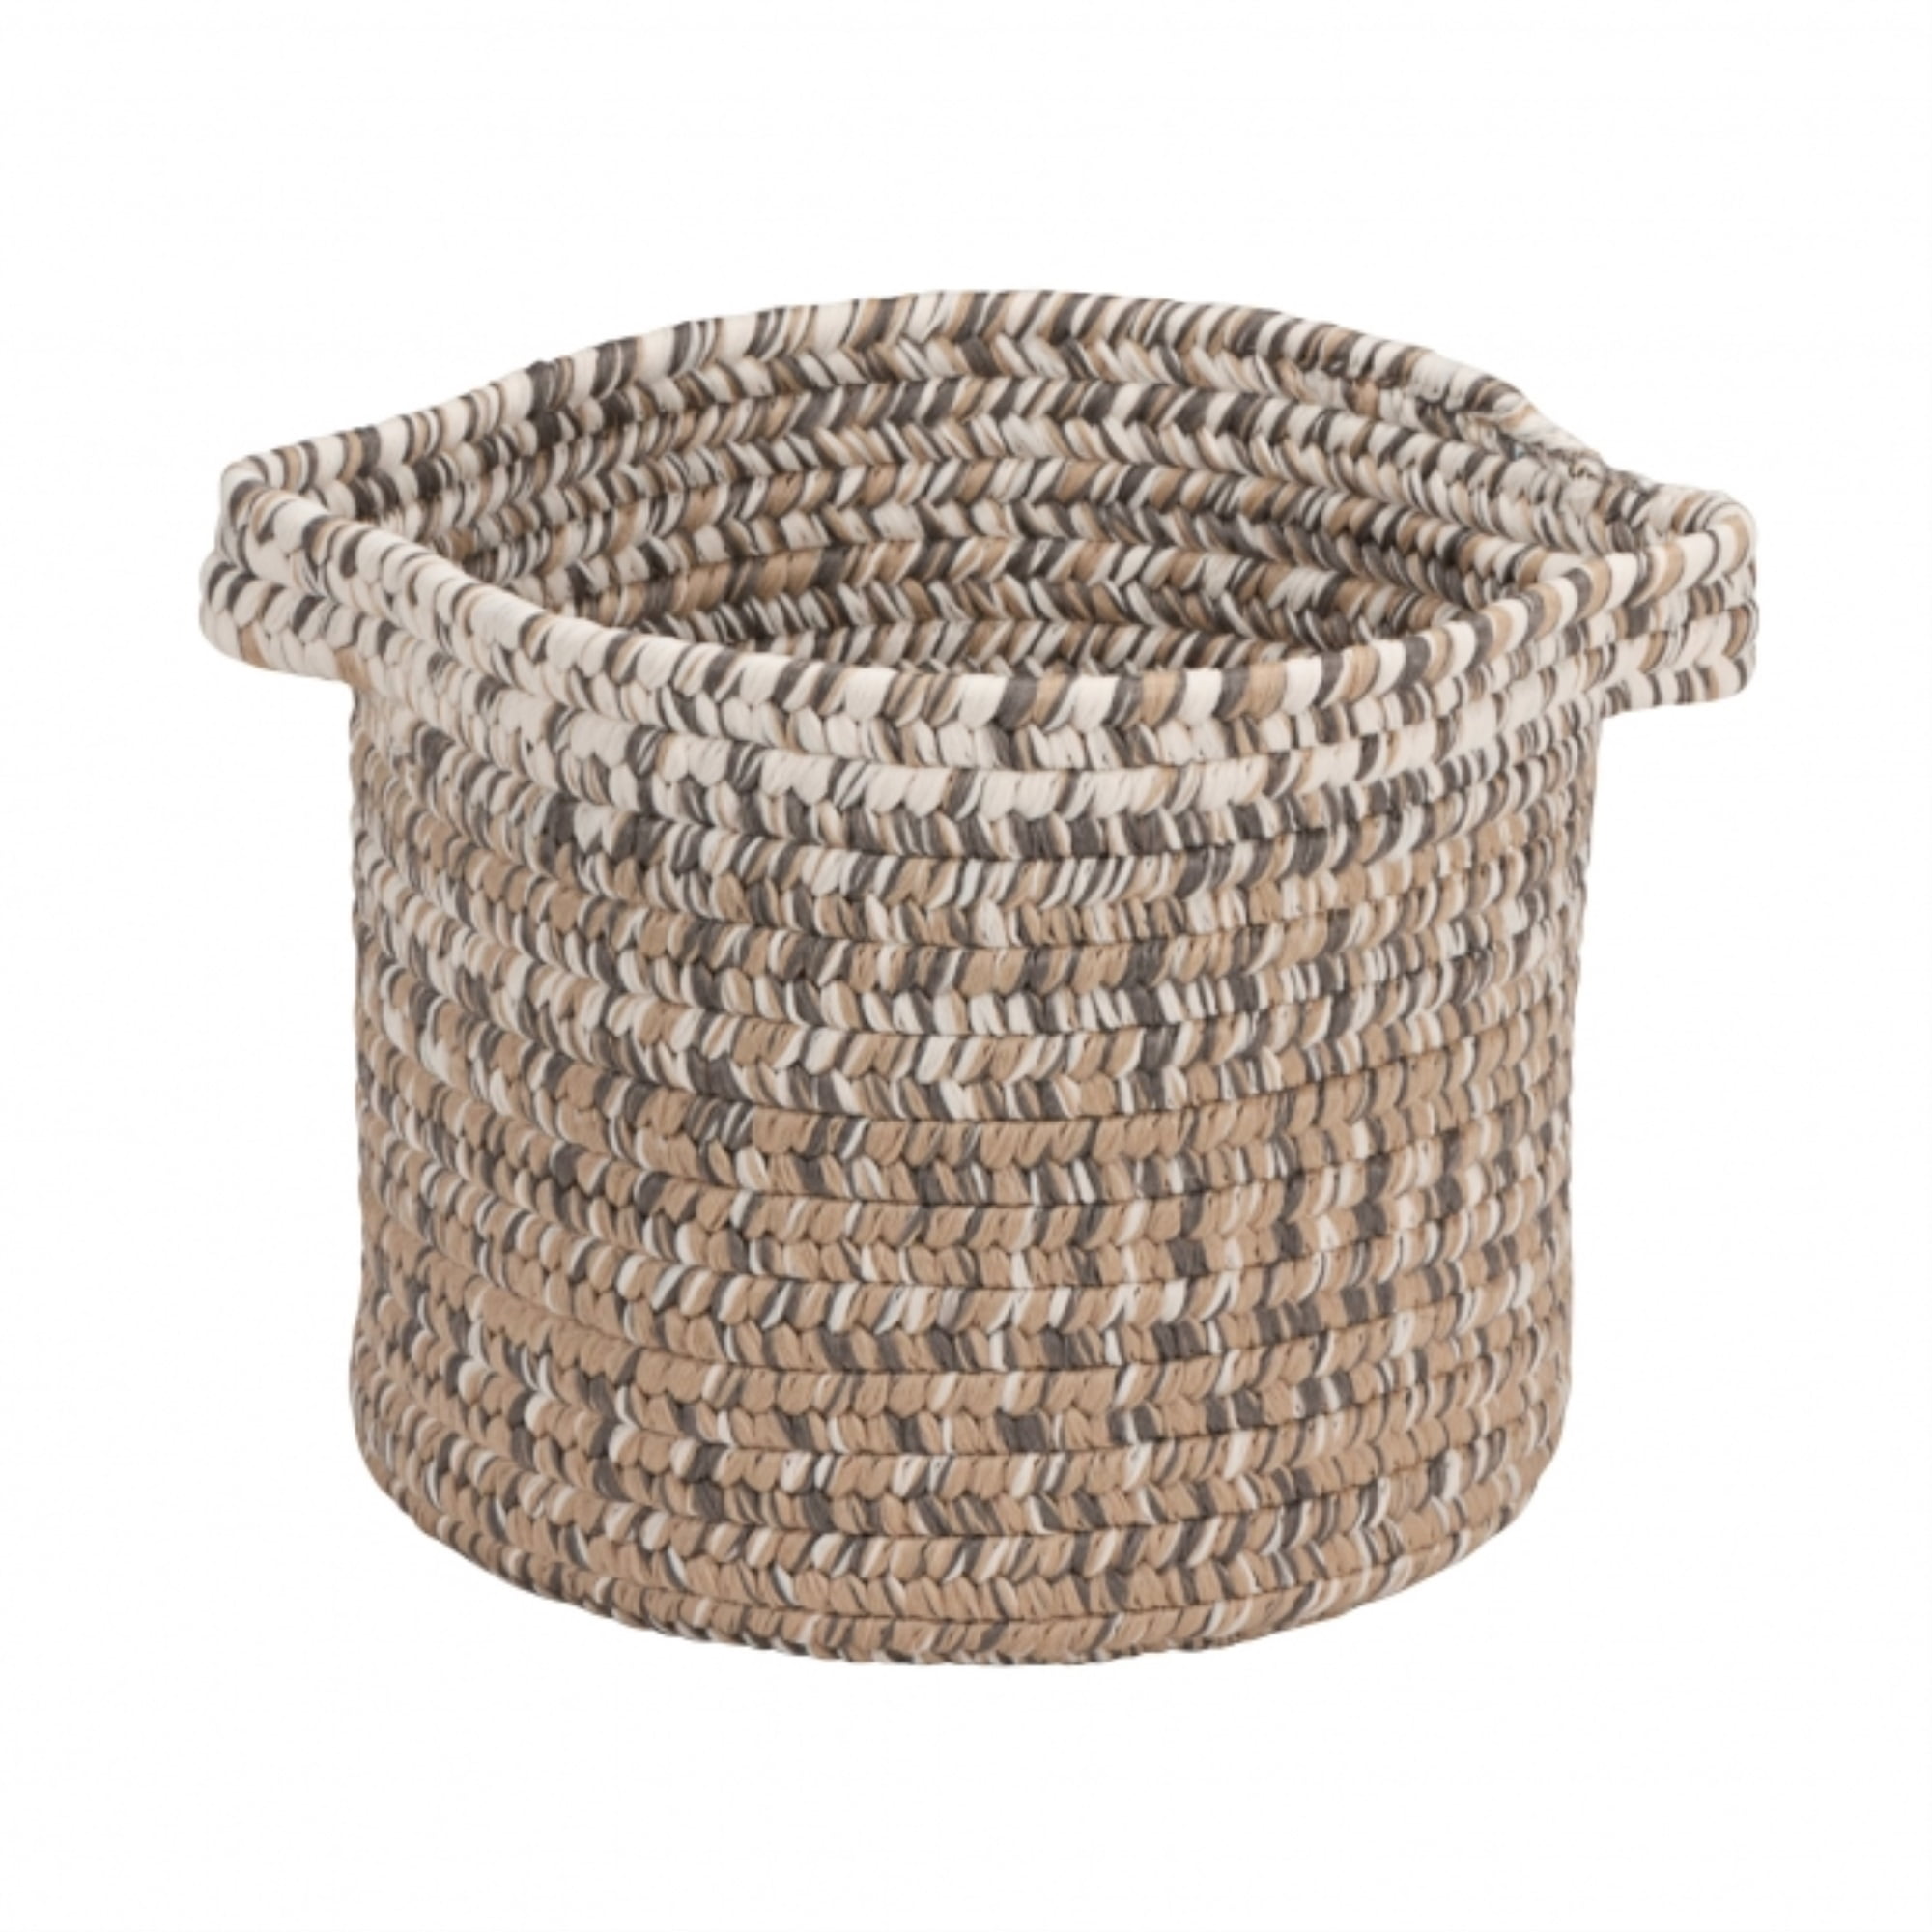 Colonia Mills Mo99 Monet Ombre Basket, Tan - 16 X 16 X 20 In.